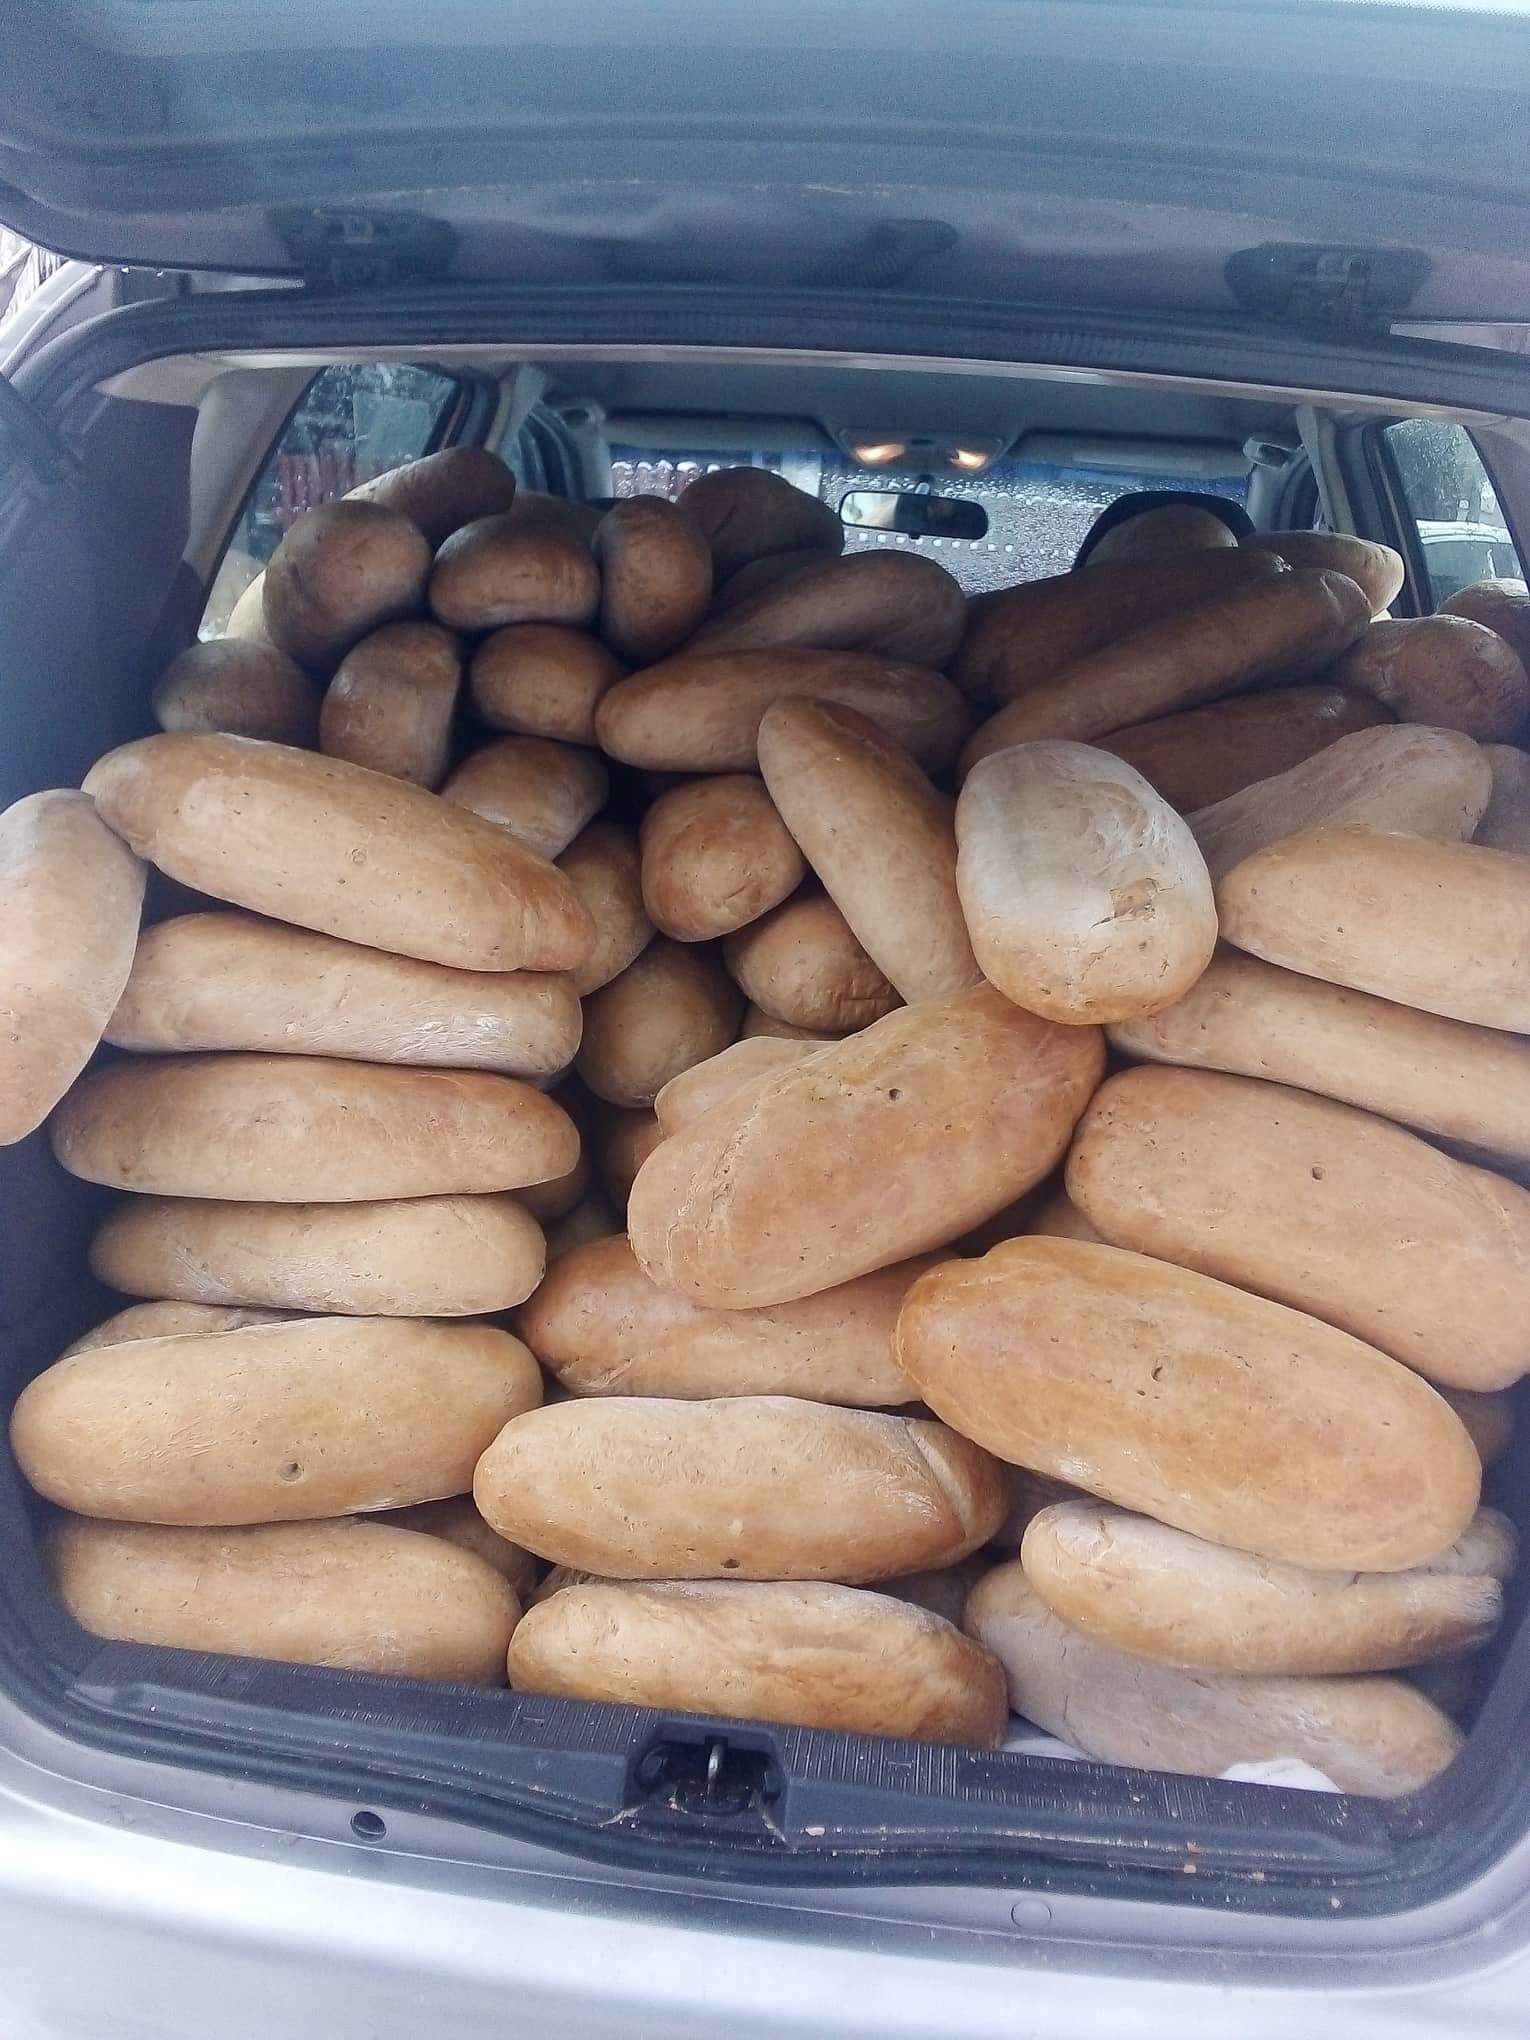 My friend is that person from maths buying hundred loafs